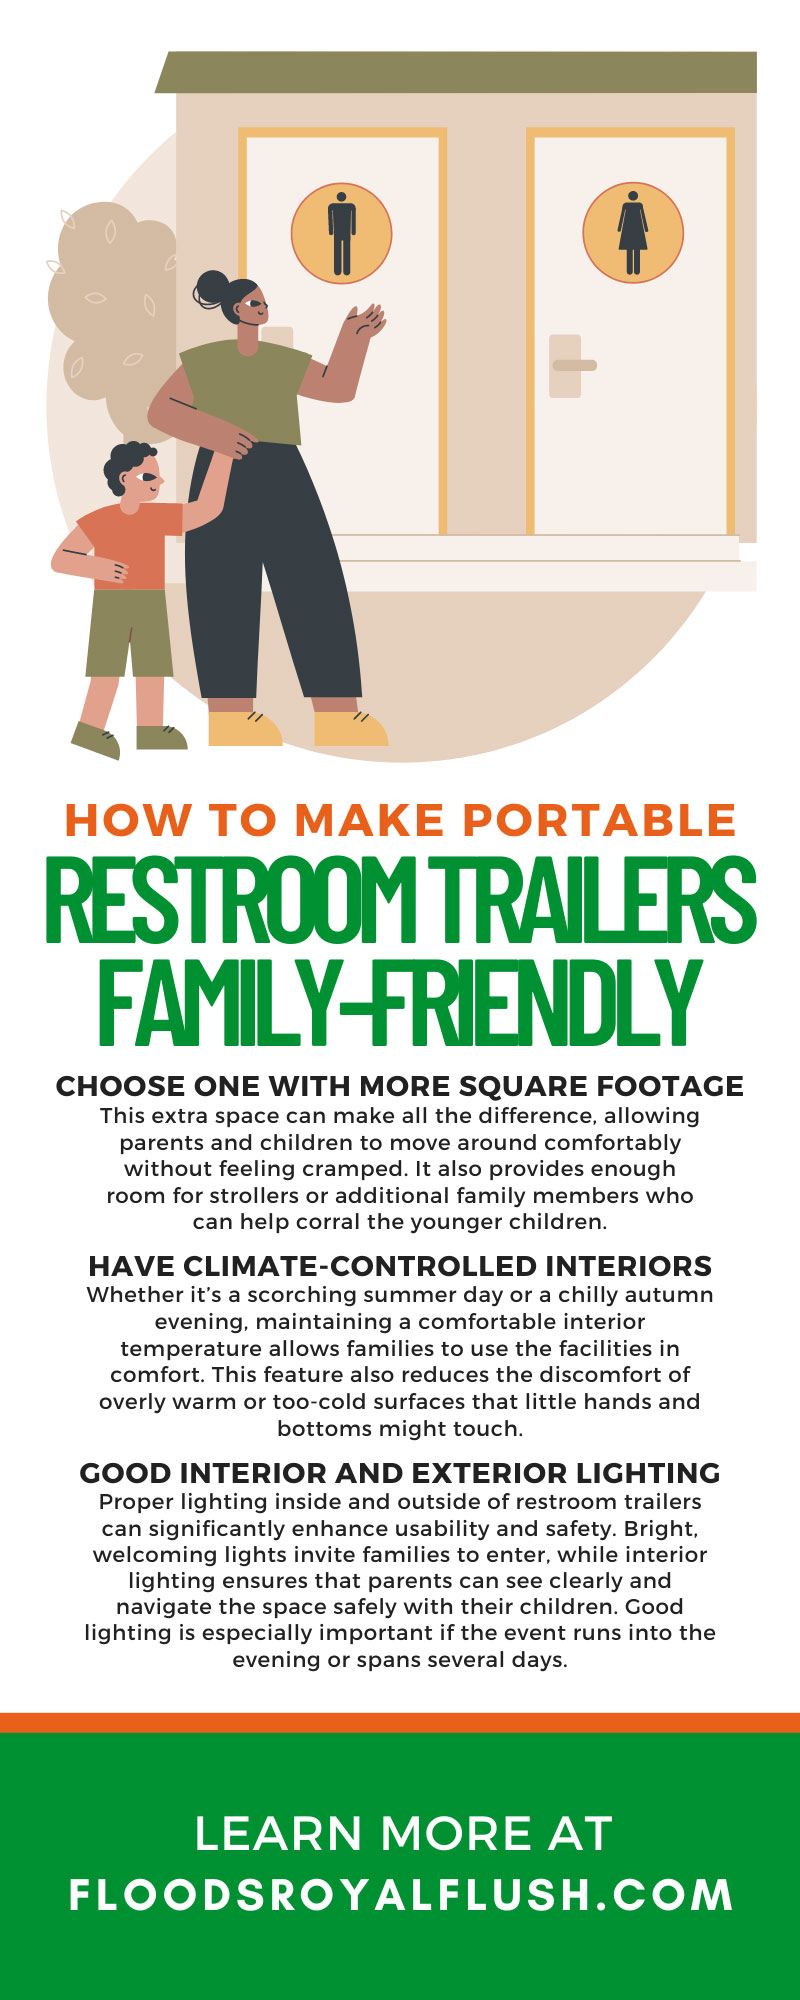 How To Make Portable Restroom Trailers Family-Friendly
